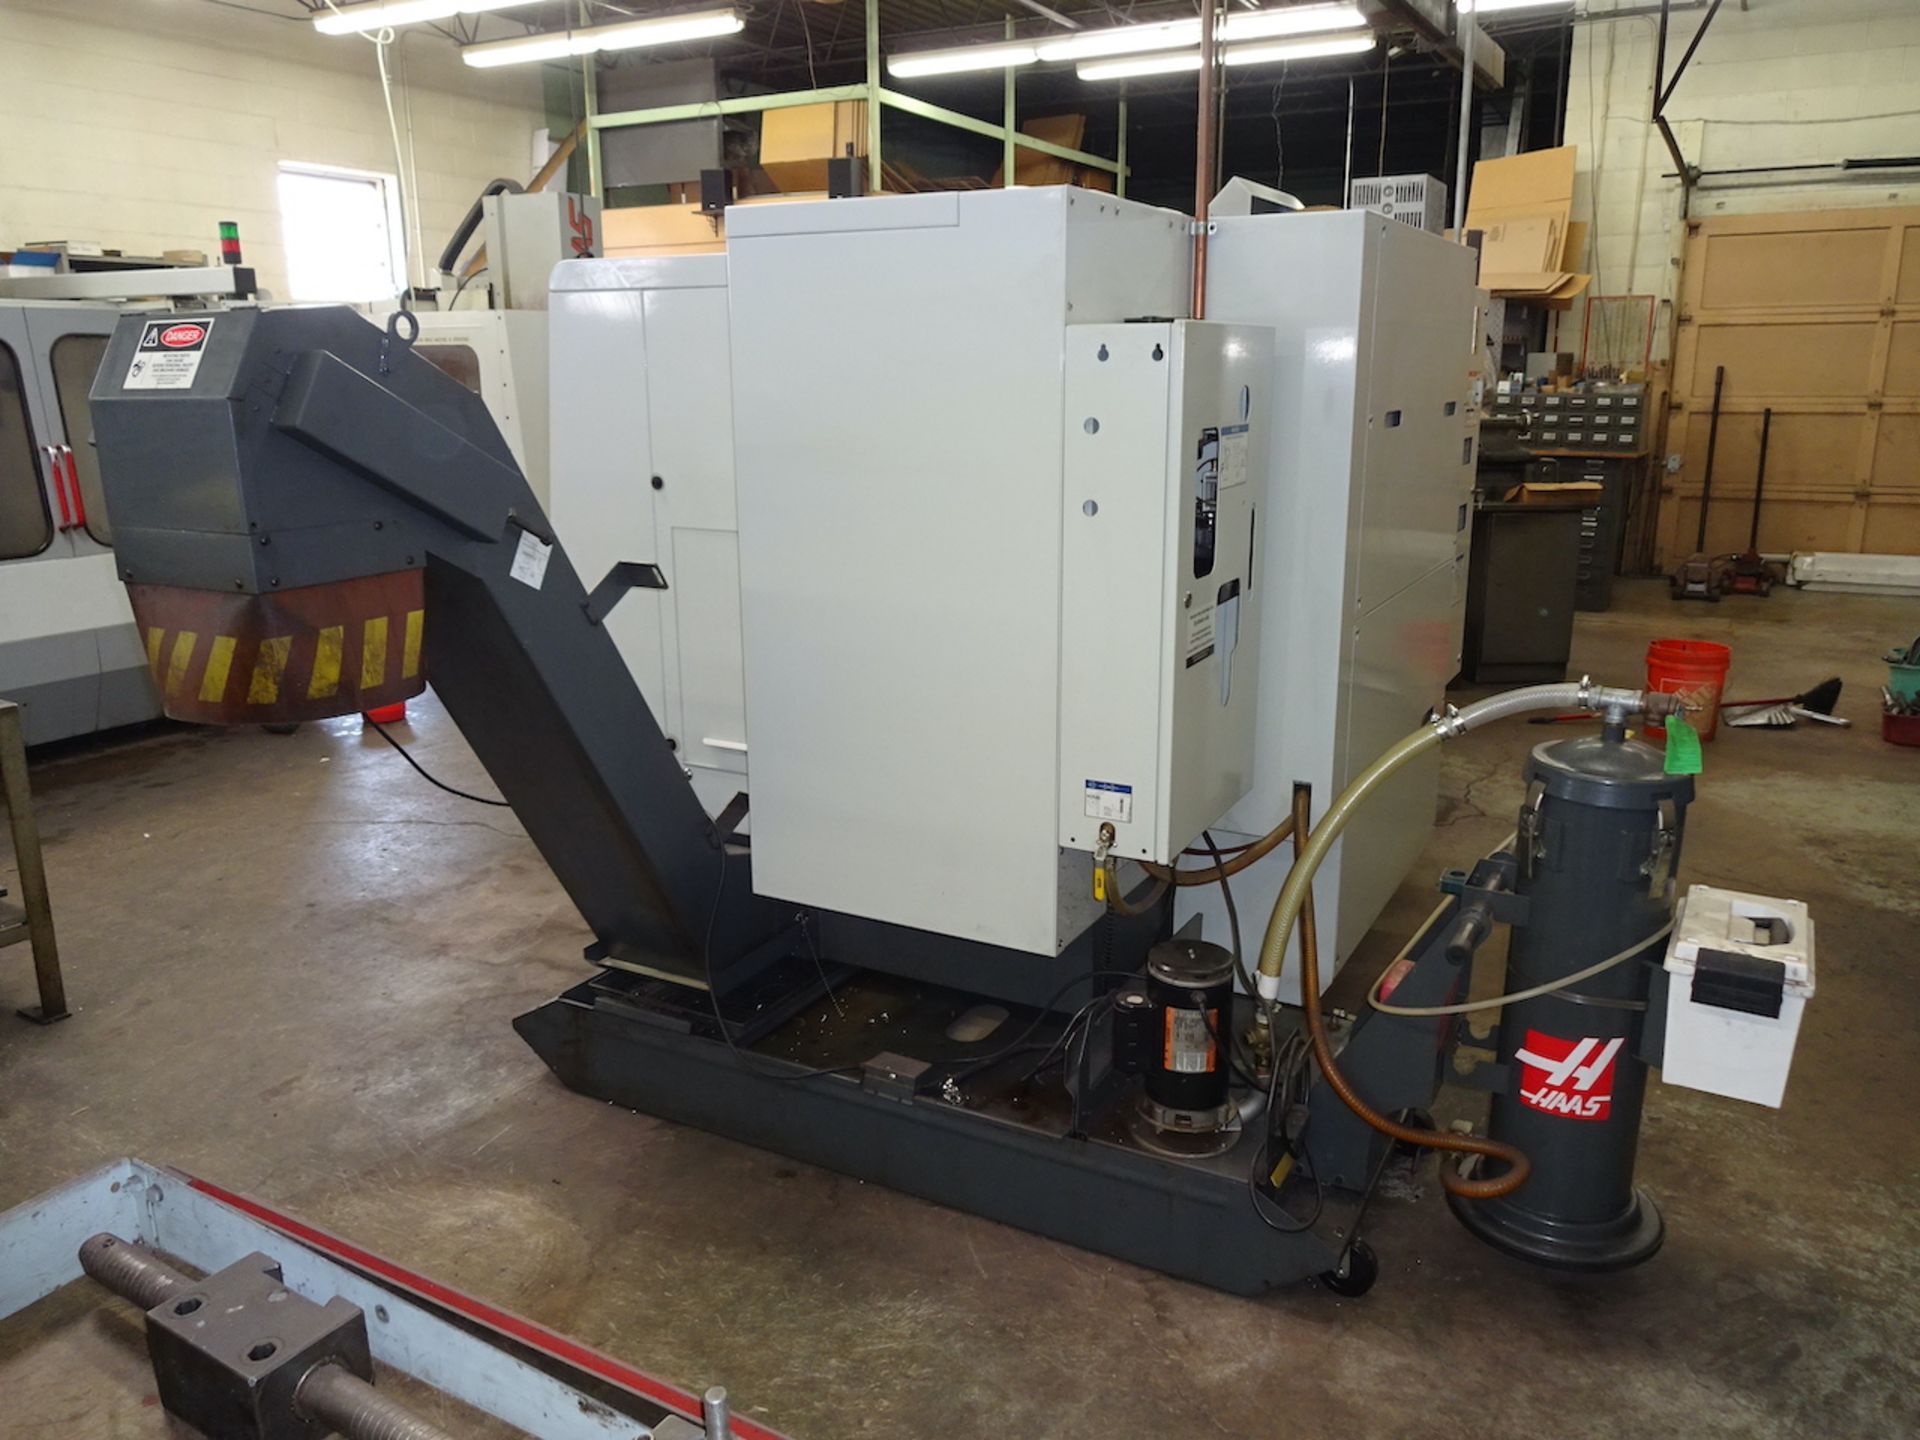 2012 Haas Model ST-20 CNC Turning Center, S/N 3093285, 12 Station Turret, Auto Tool Pre-Setter, - Image 7 of 13